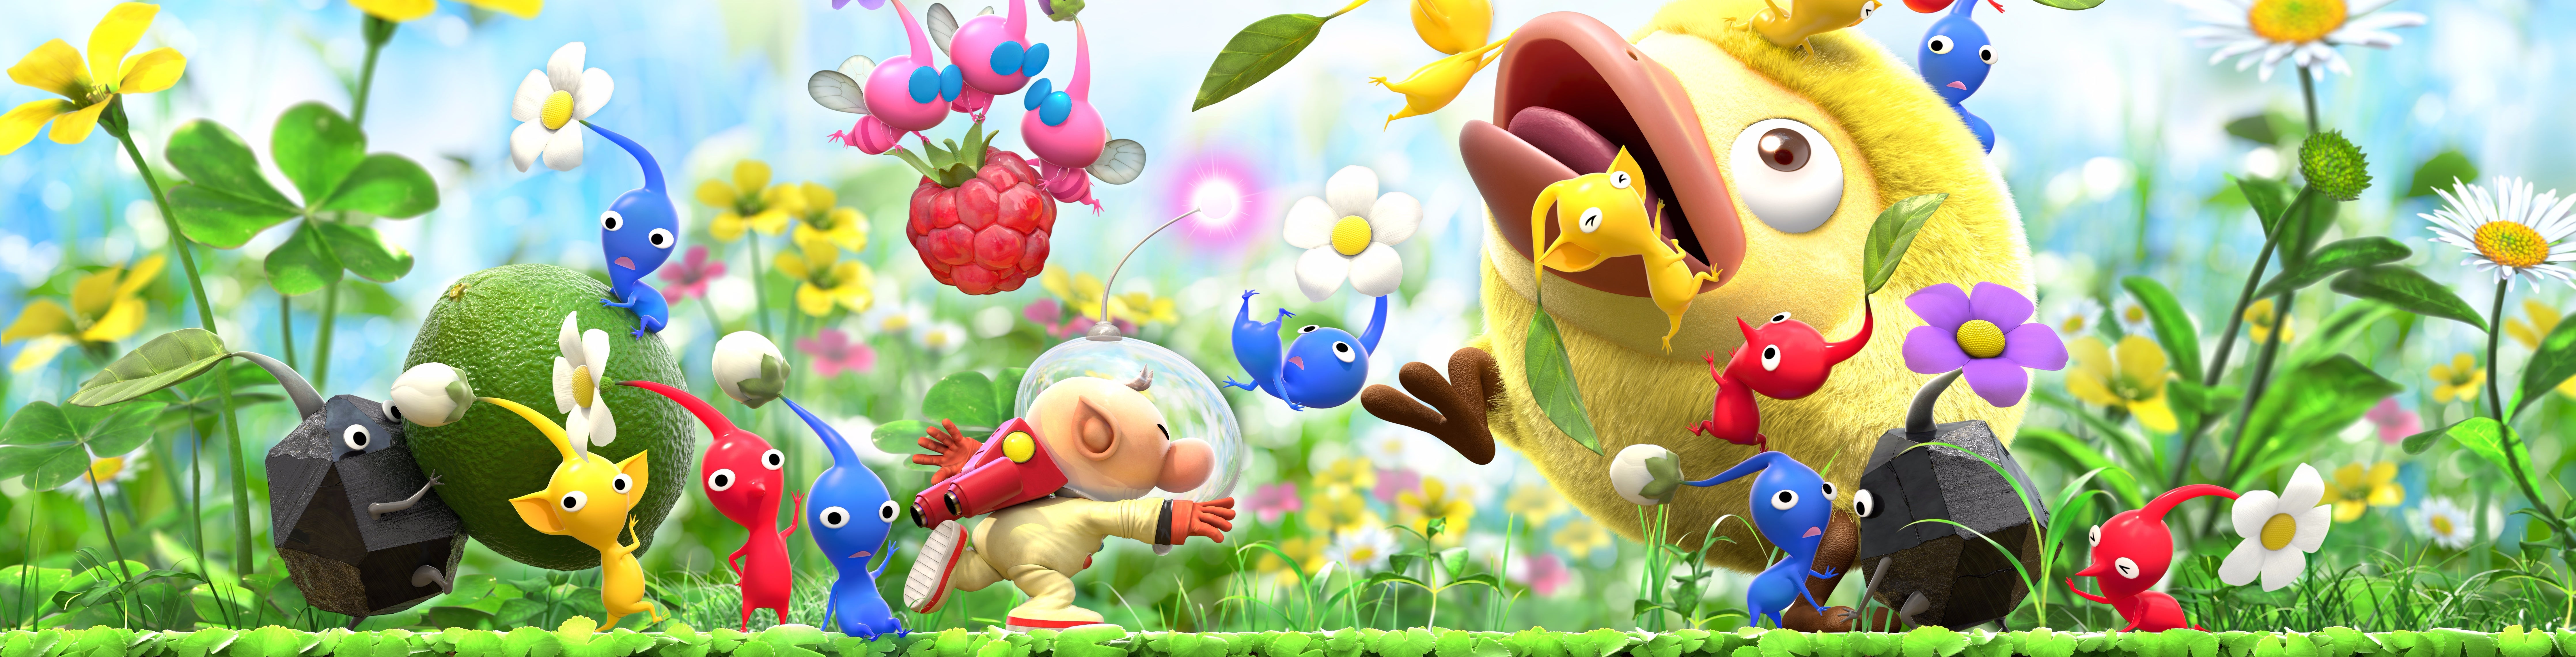 Image for Hey! Pikmin review